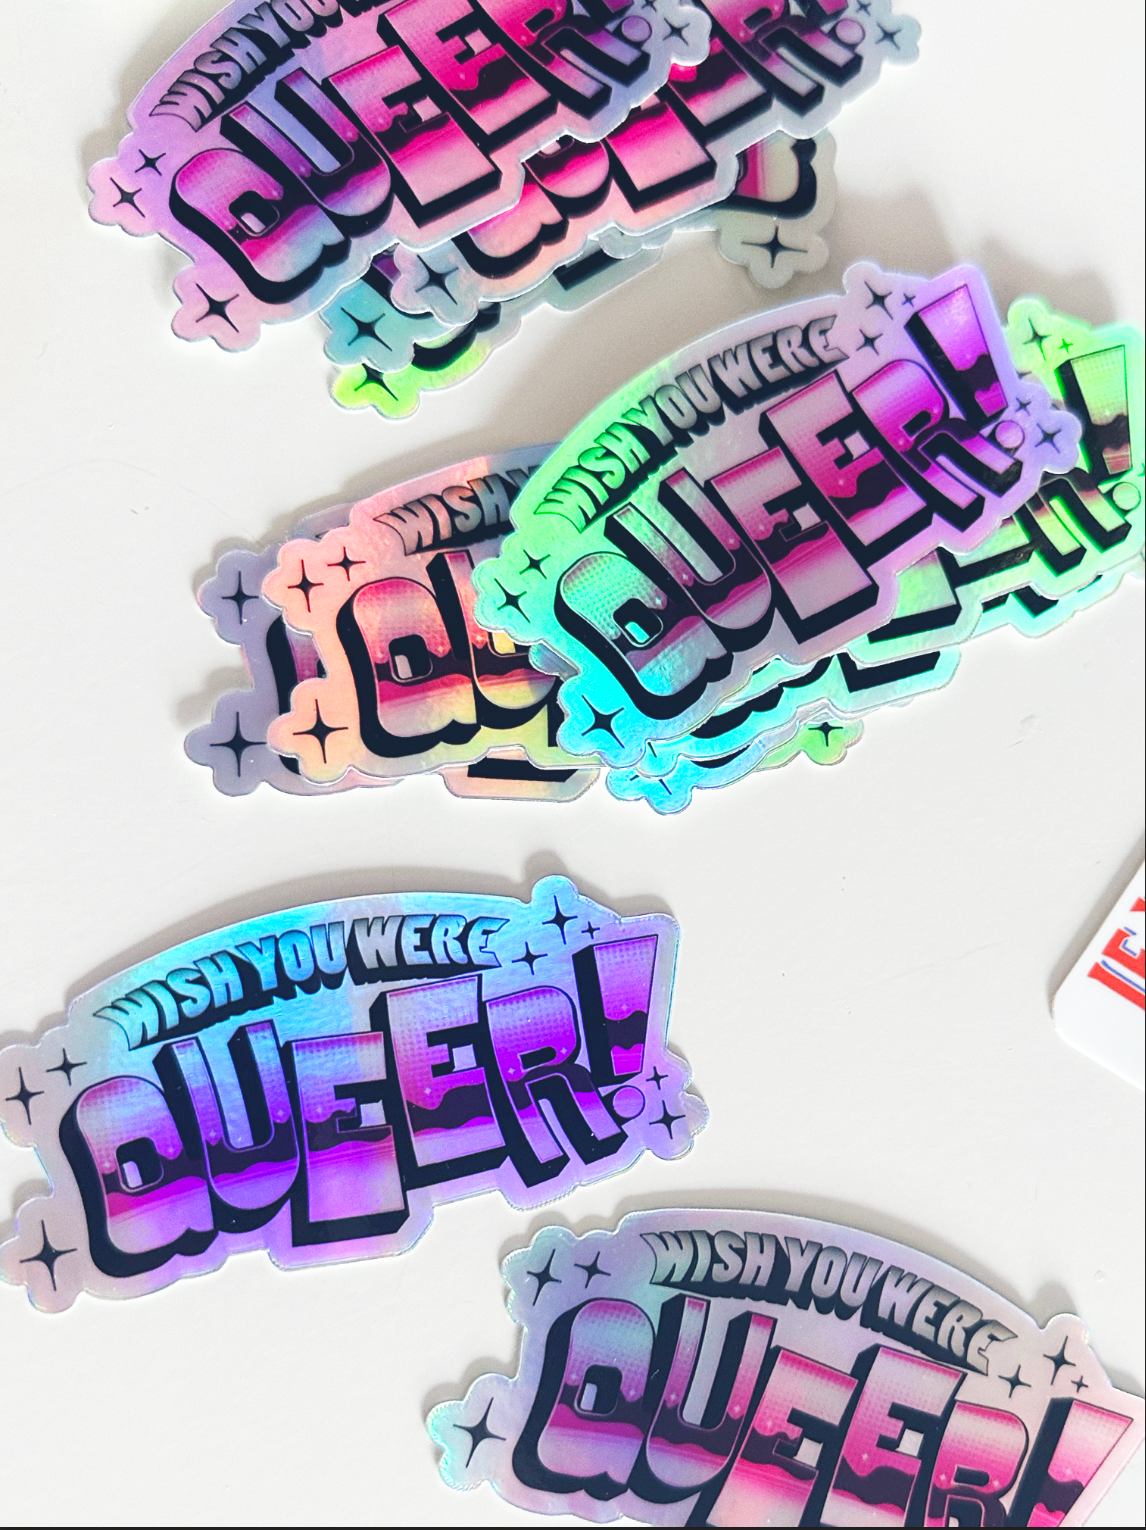 Wish you were Queer! Holographic Sticker